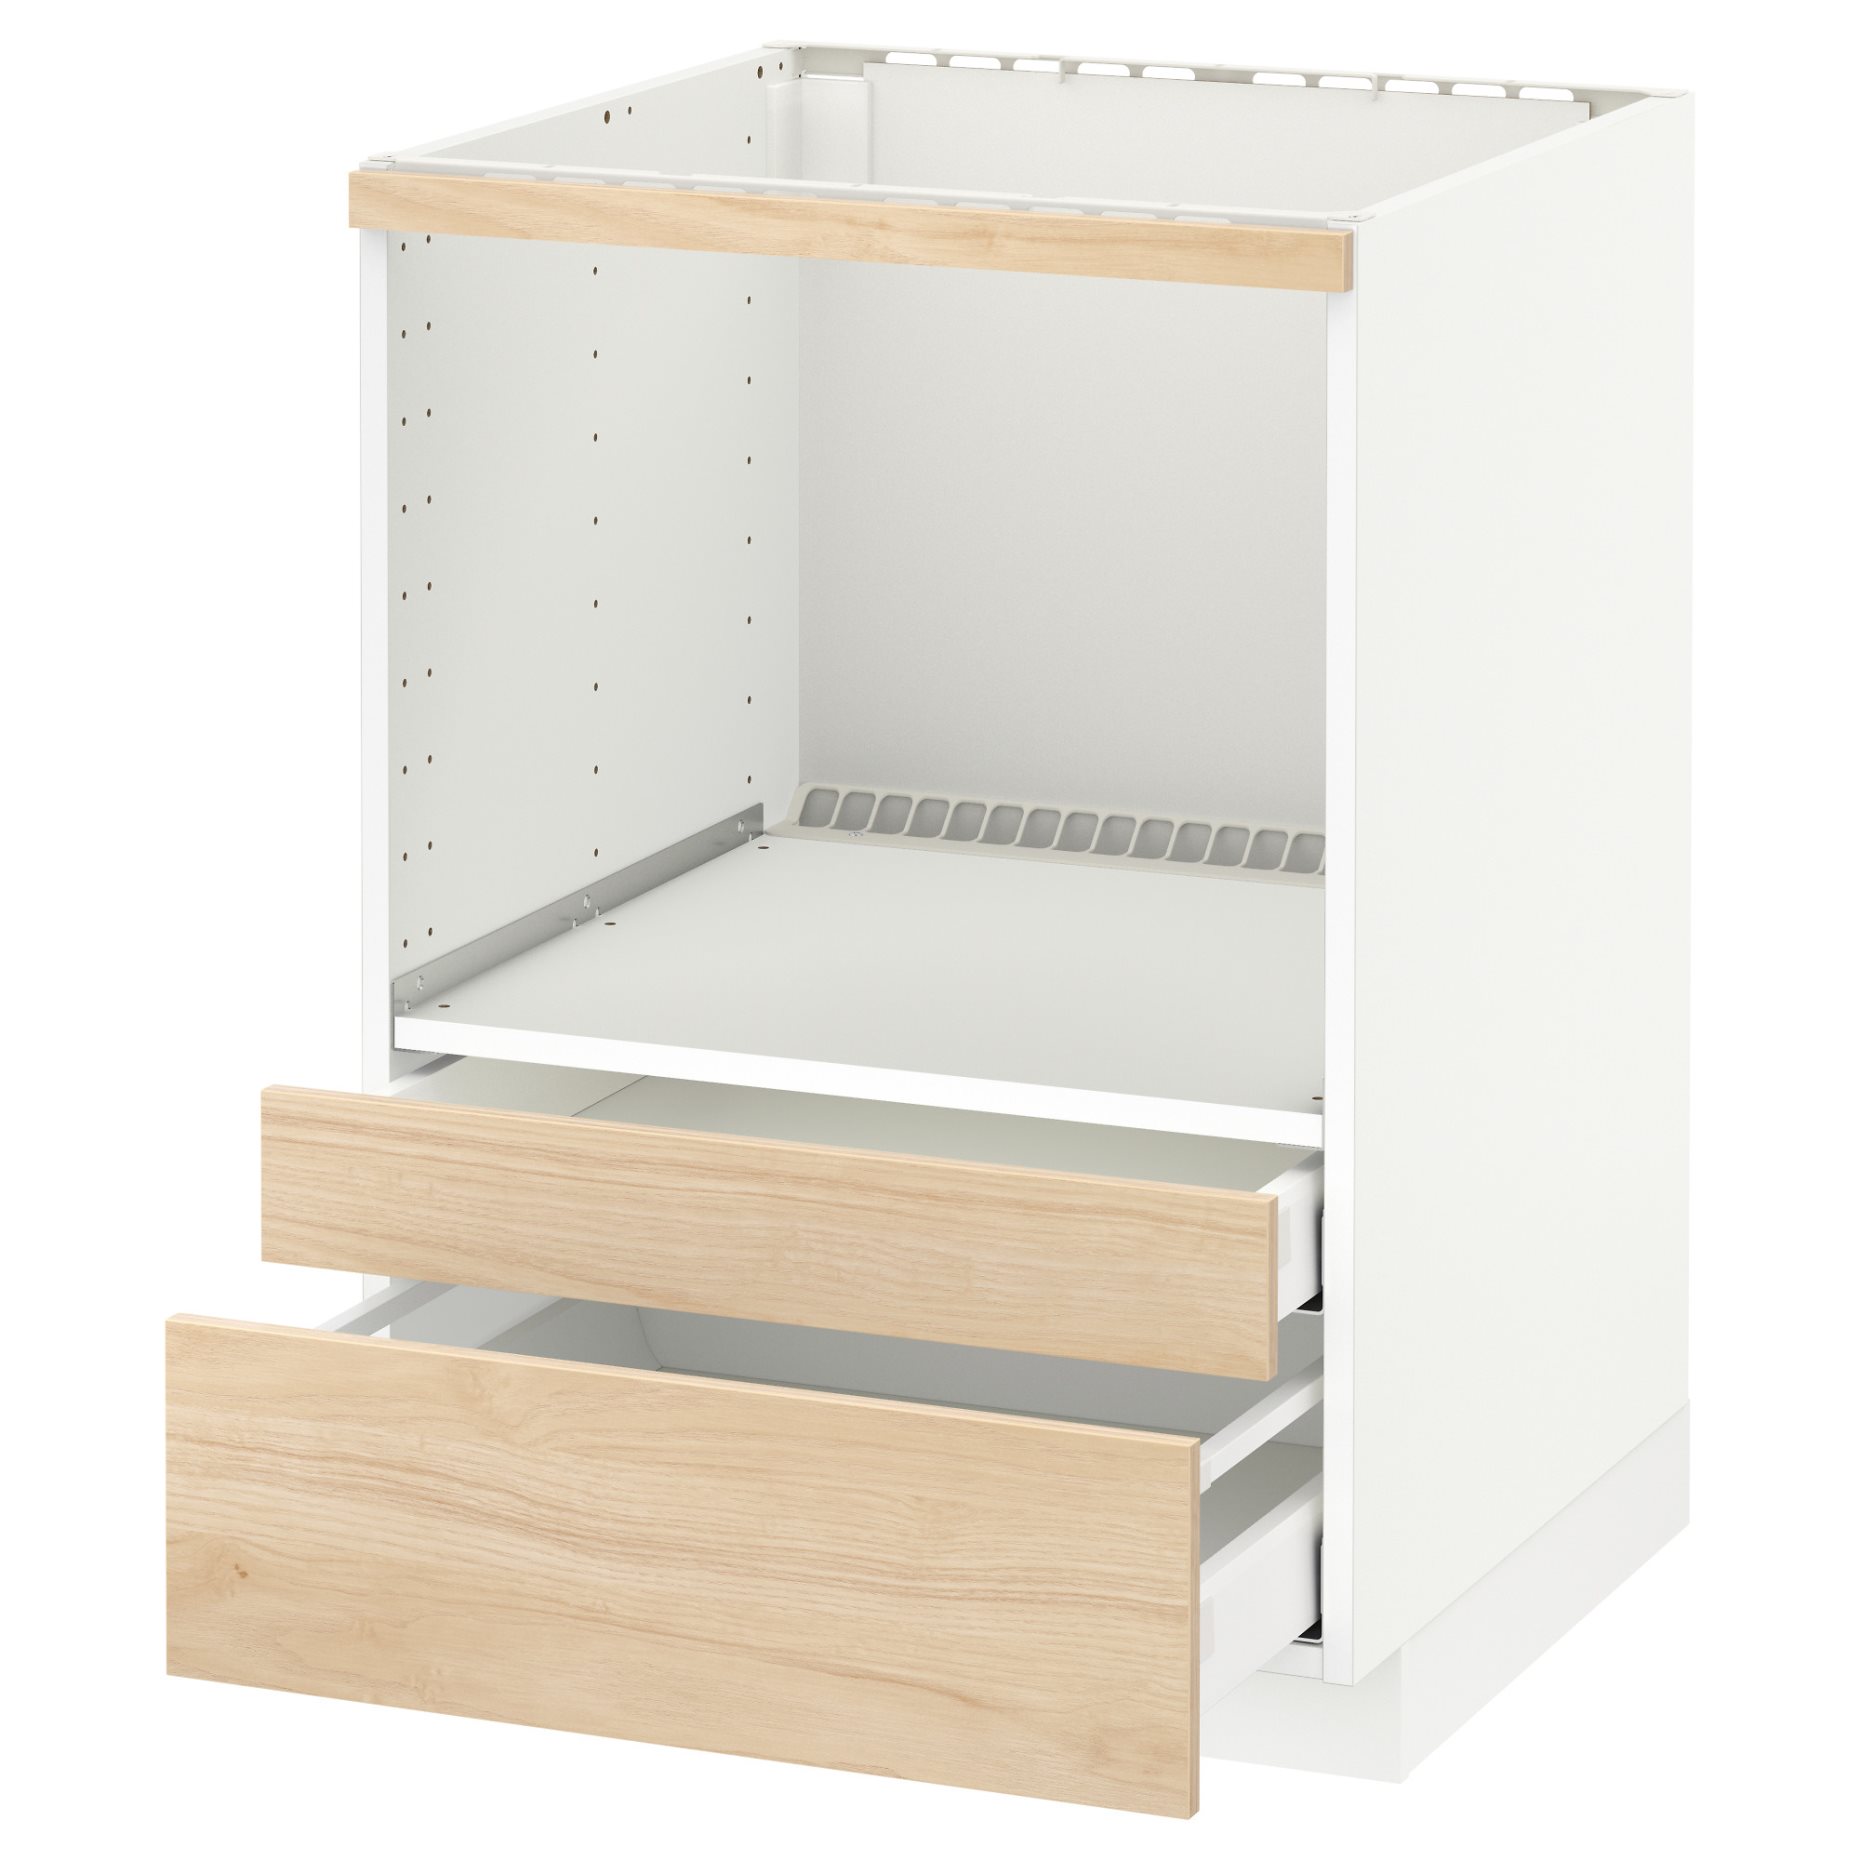 METOD/MAXIMERA, base cabinet for combi microwave/drawers, 692.161.92